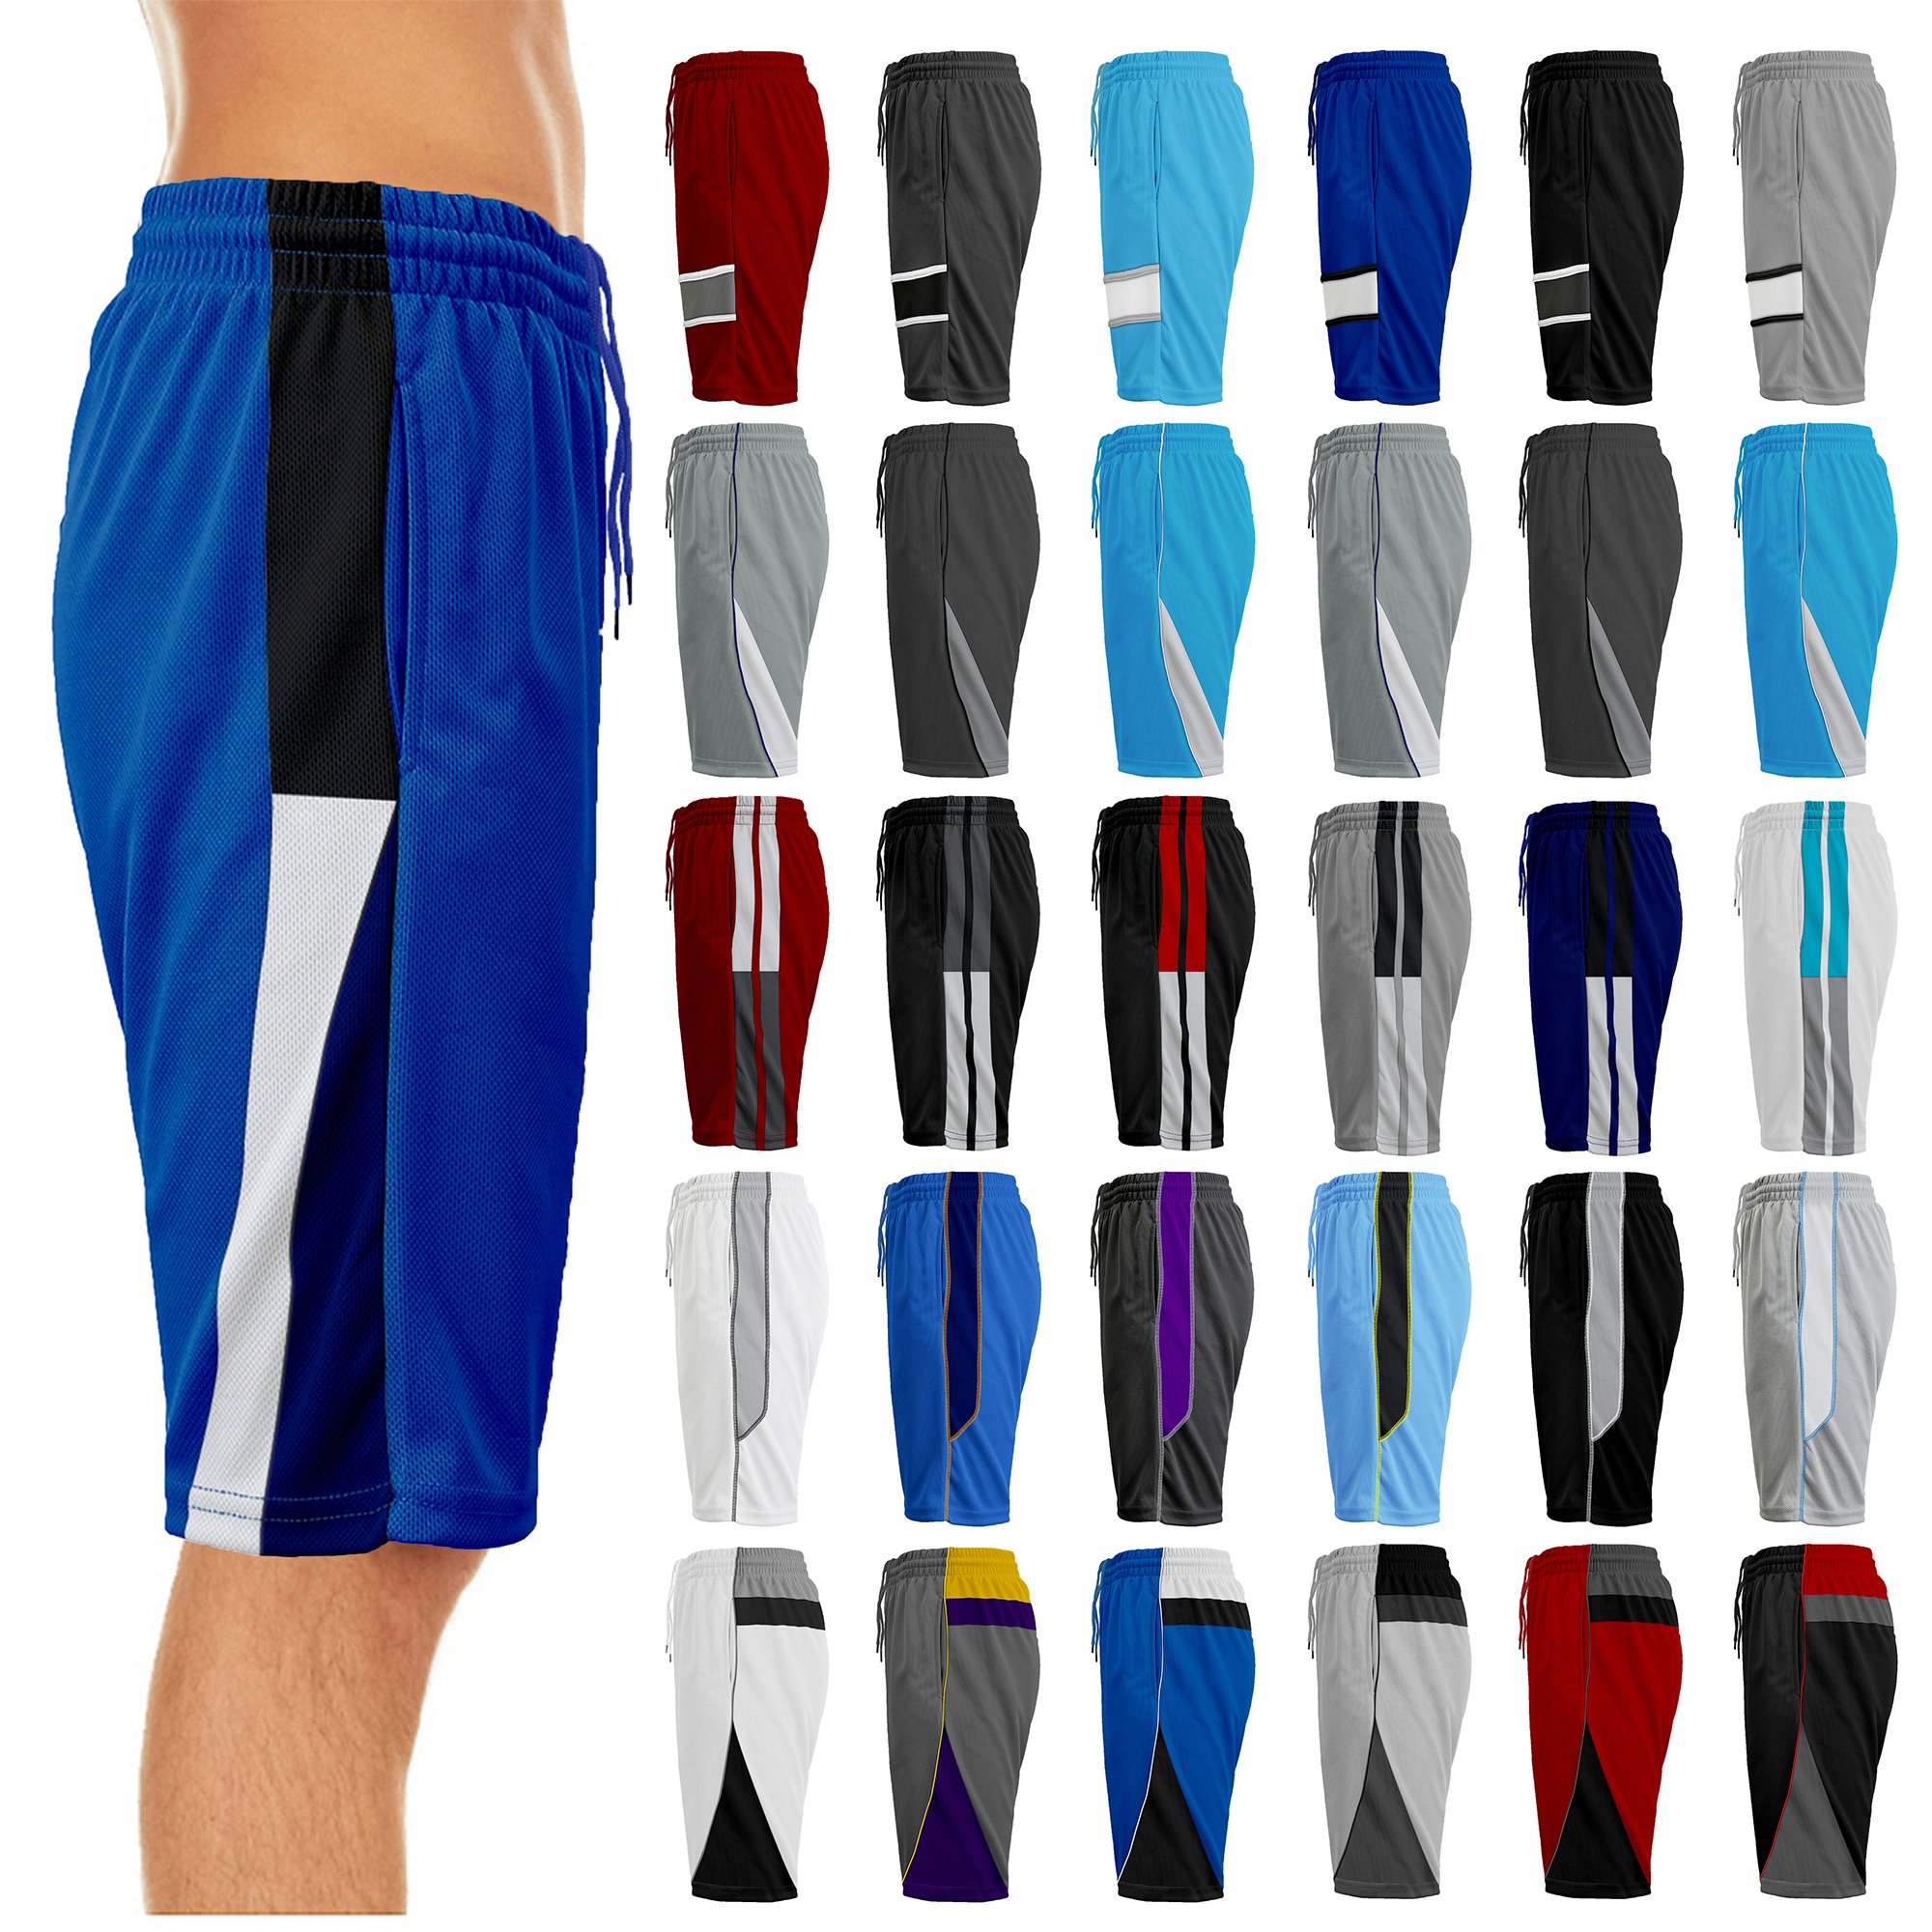 5-Pack: Men's Active Moisture-Wicking Mesh Performance Shorts (S-2XL) - Assorted, Small